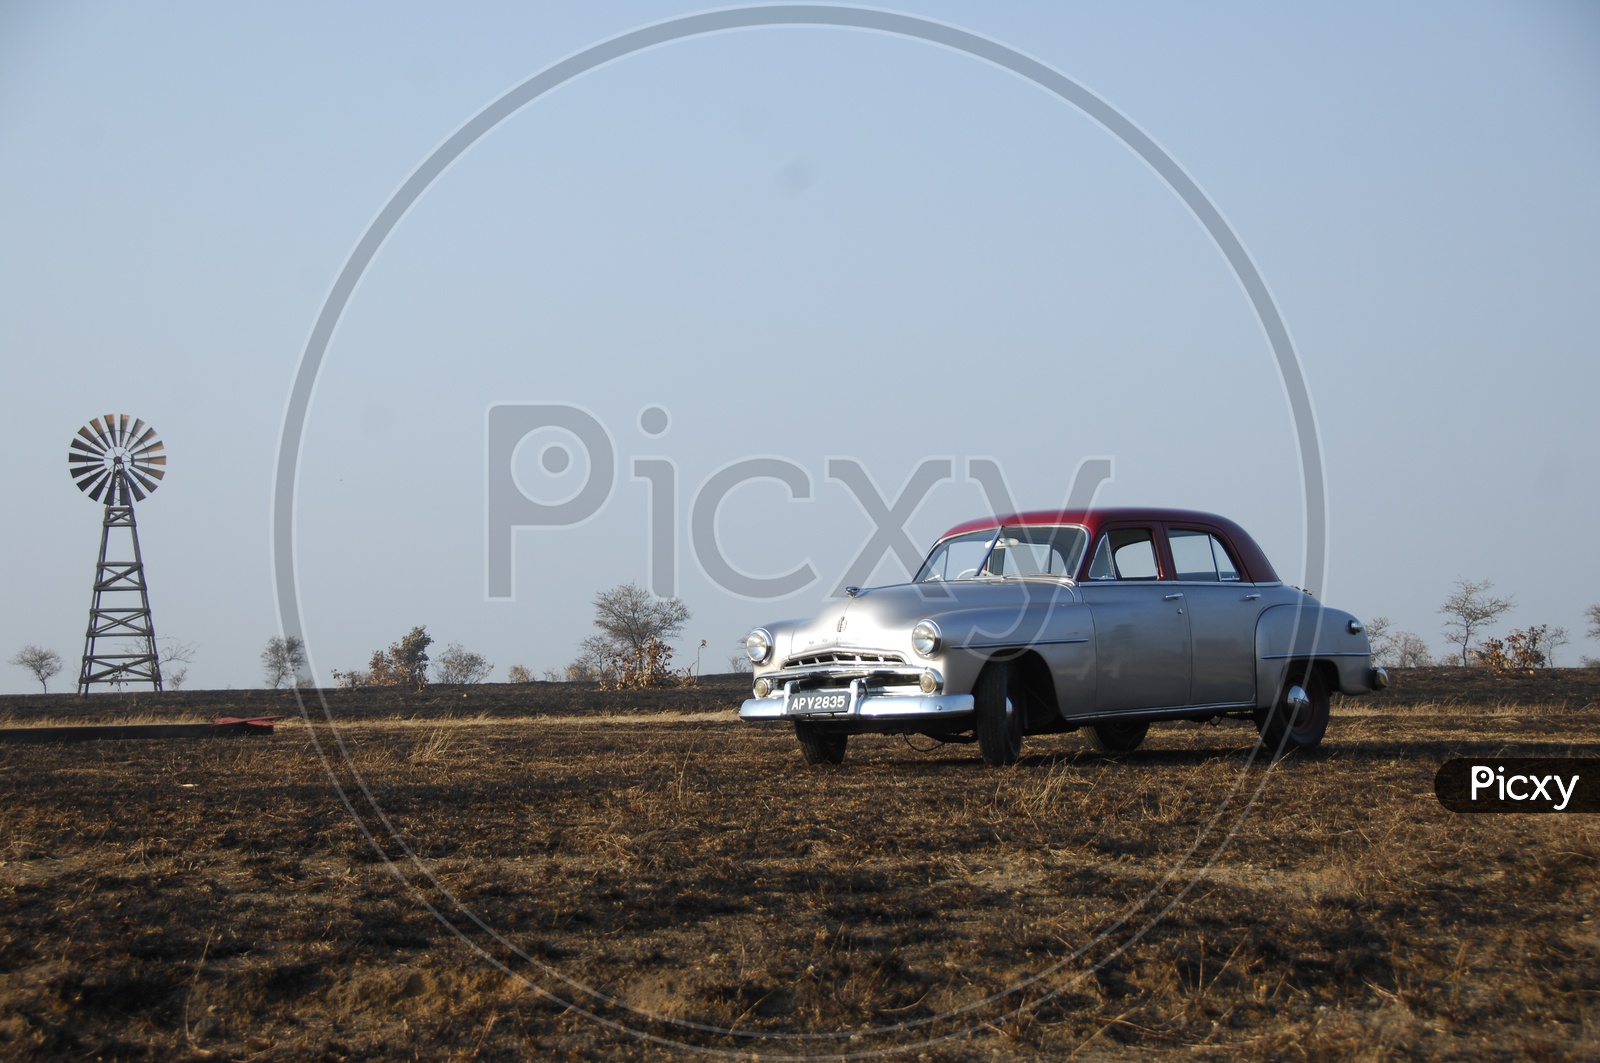 A Vintage Car on a Ground For Display